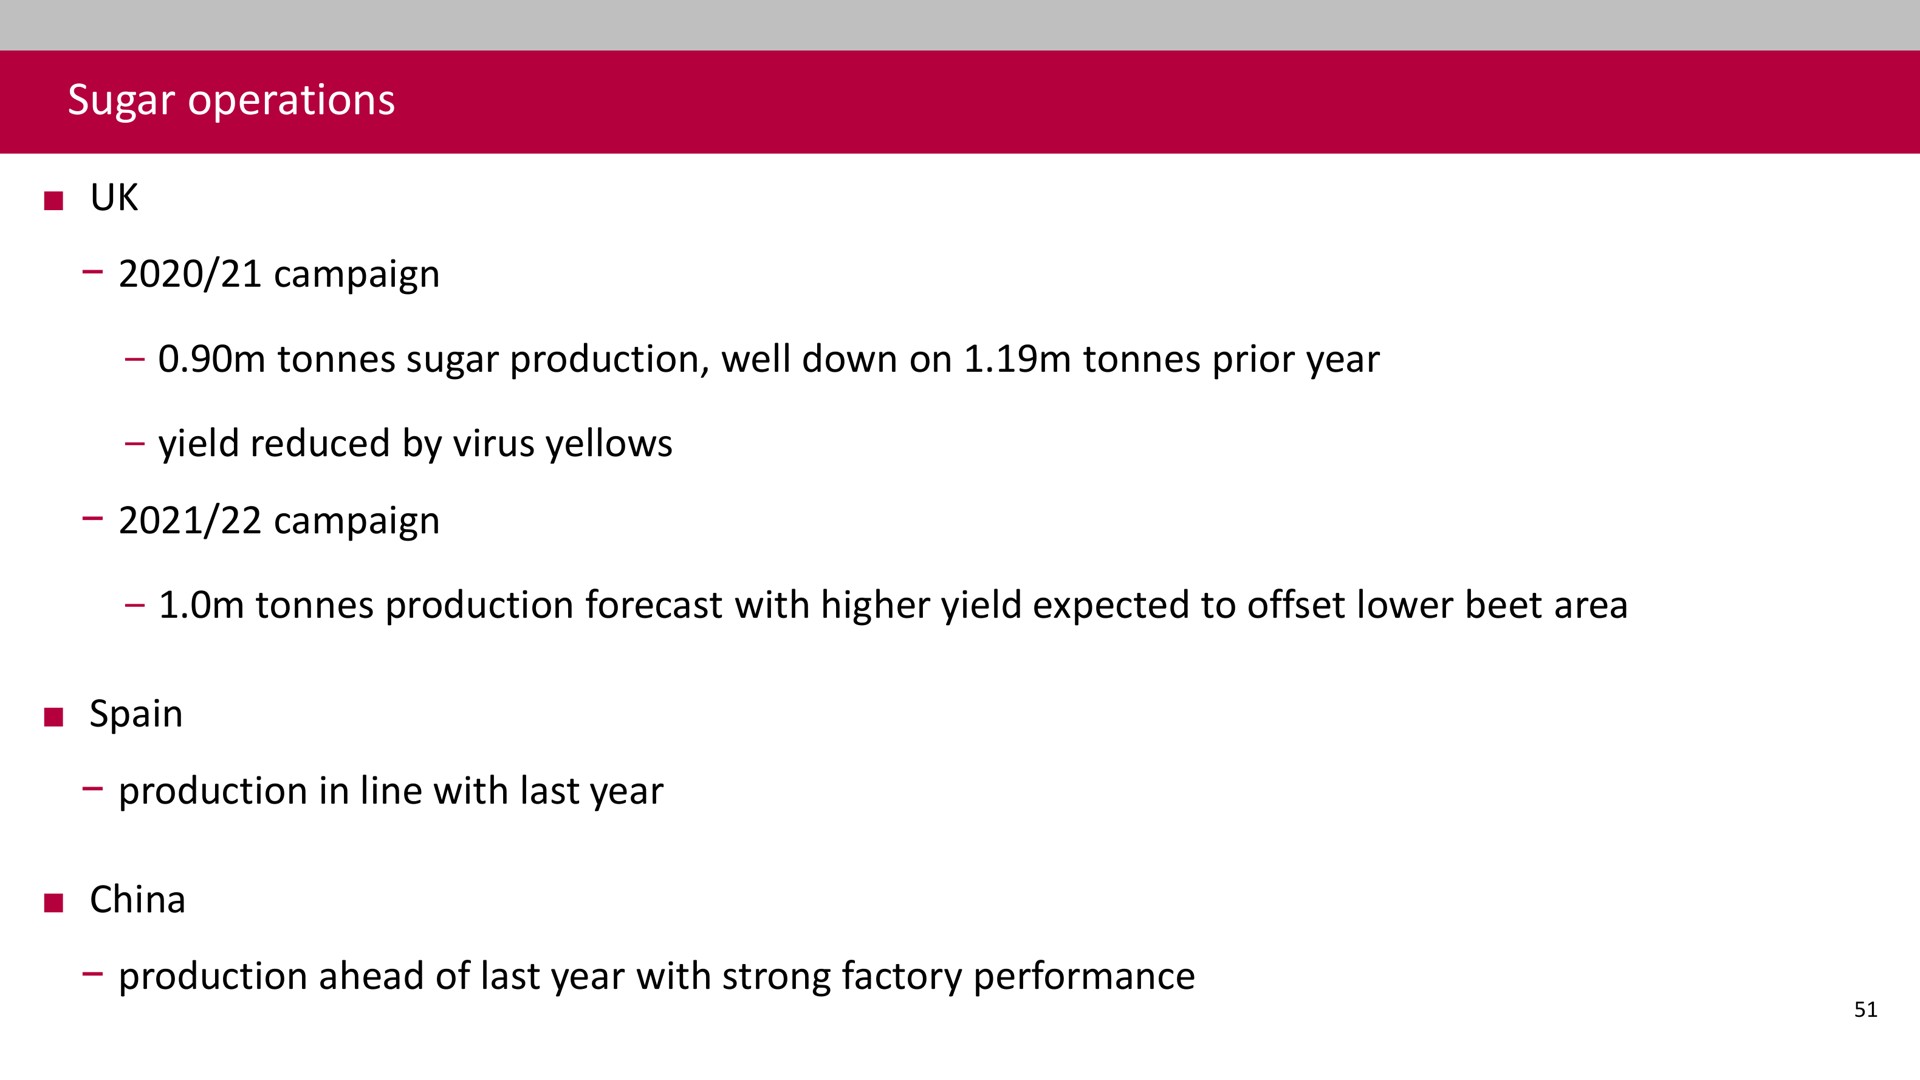 sugar operations campaign sugar production well down on prior year yield reduced by virus yellows campaign production forecast with higher yield expected to offset lower beet area production in line with last year china production ahead of last year with strong factory performance | Associated British Foods